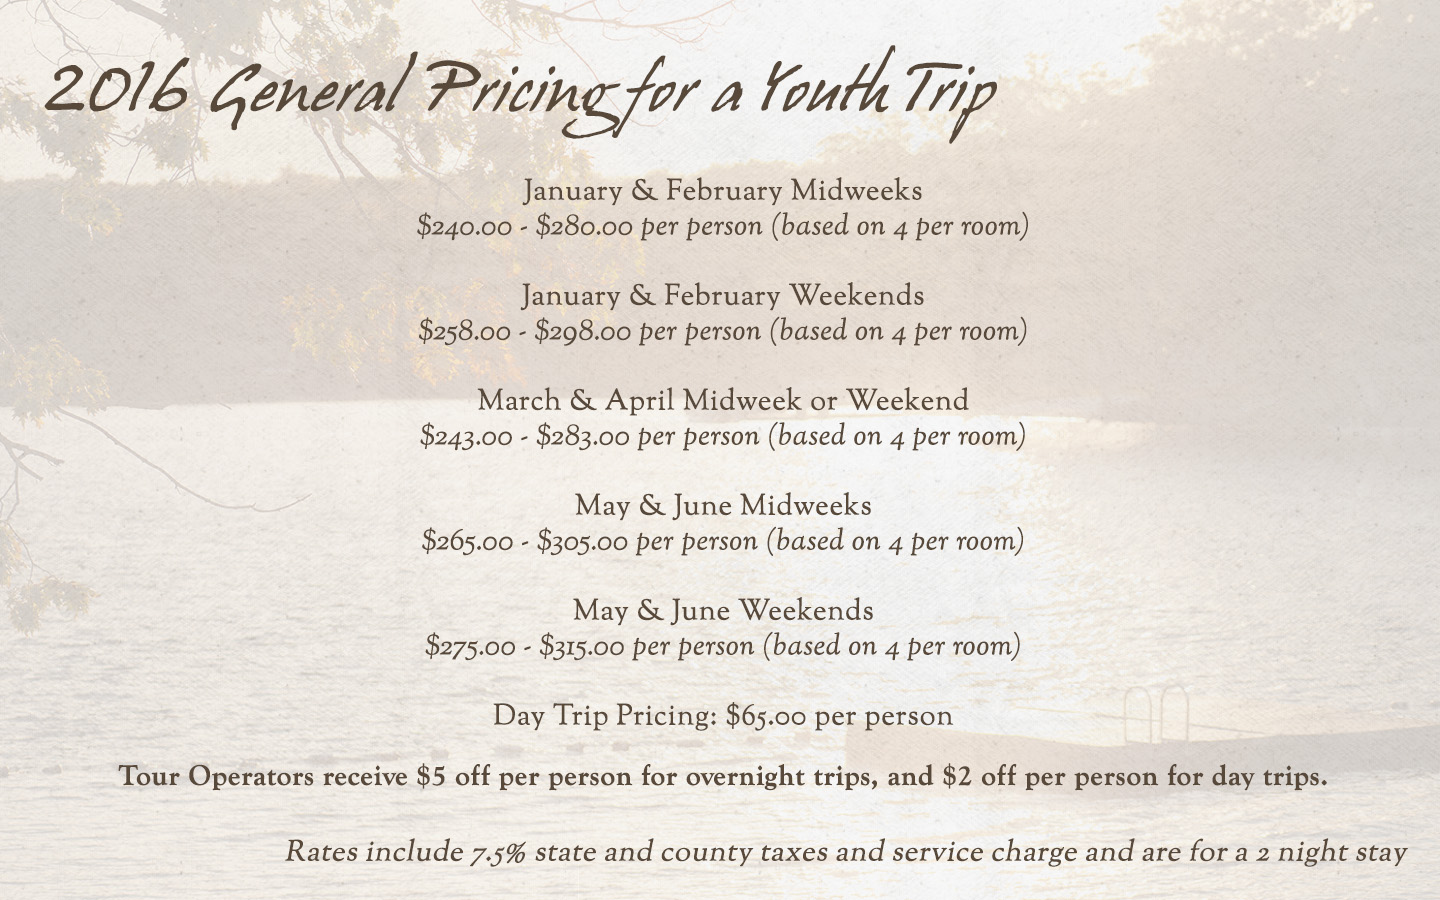 2016 General pricing for a Youth Trip.